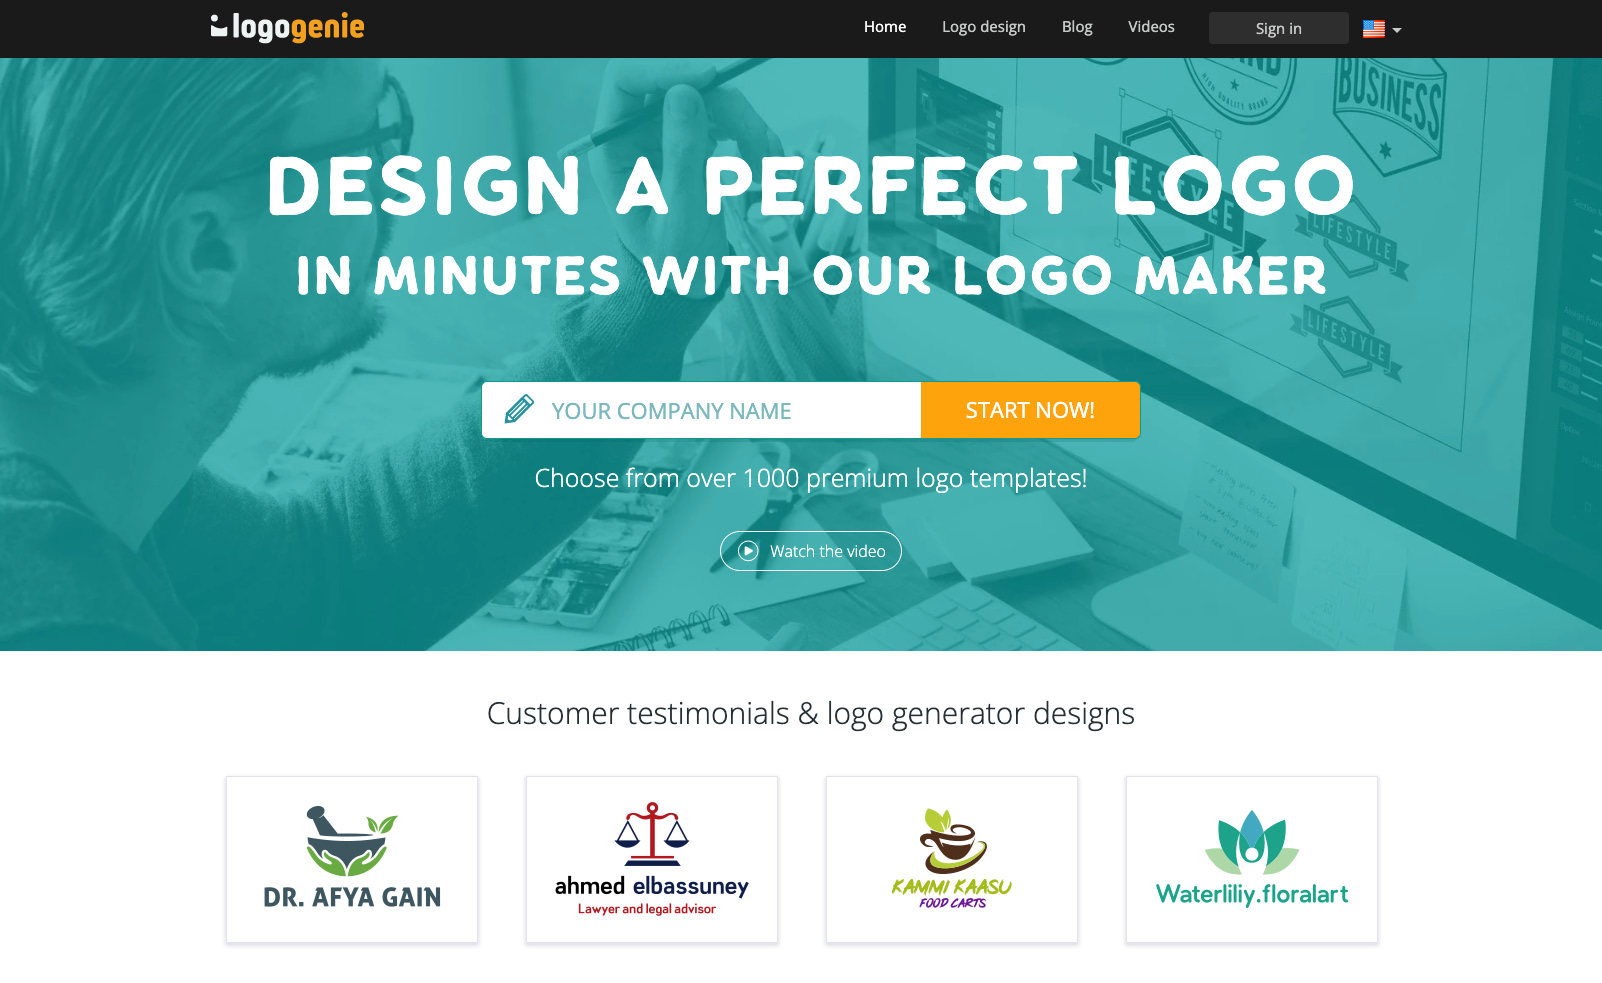 Logo Genie offers one of the best logo maker tools for those looking for a minimalist logo design.